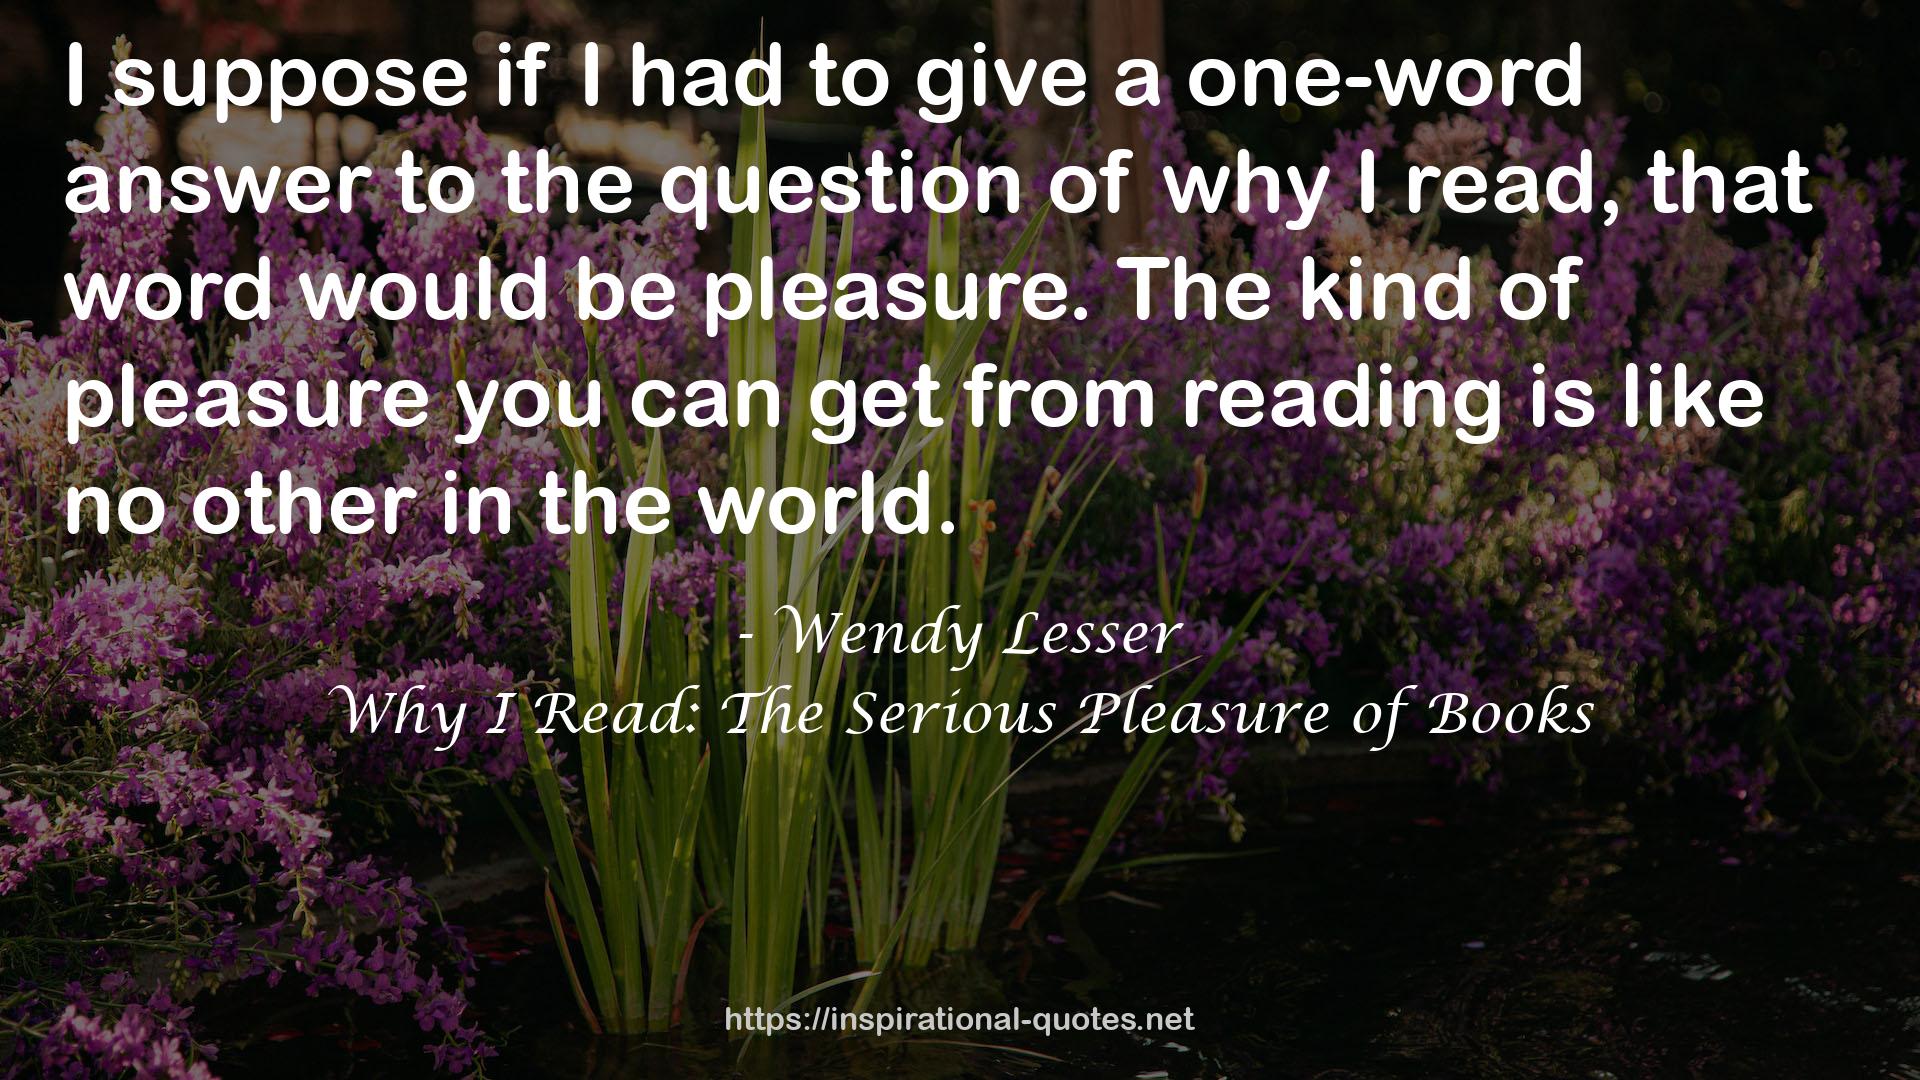 Why I Read: The Serious Pleasure of Books QUOTES